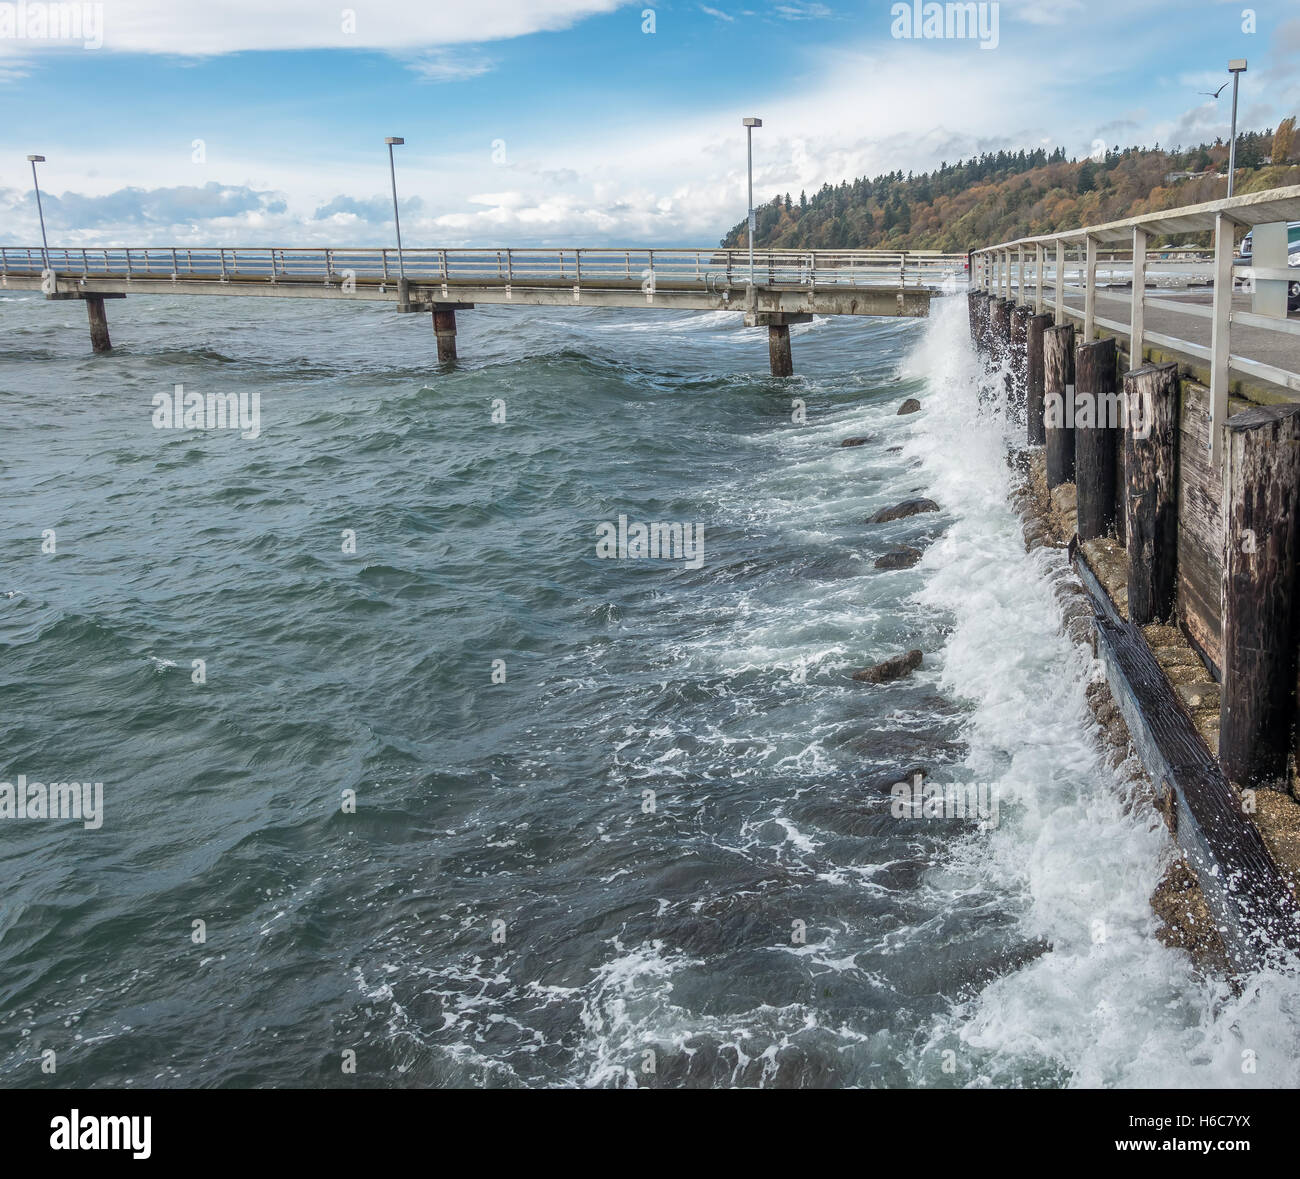 Surf crashes against a wood seawall resulting in whitewater explosions. Shot taken in Des Moines, Washington. Stock Photo